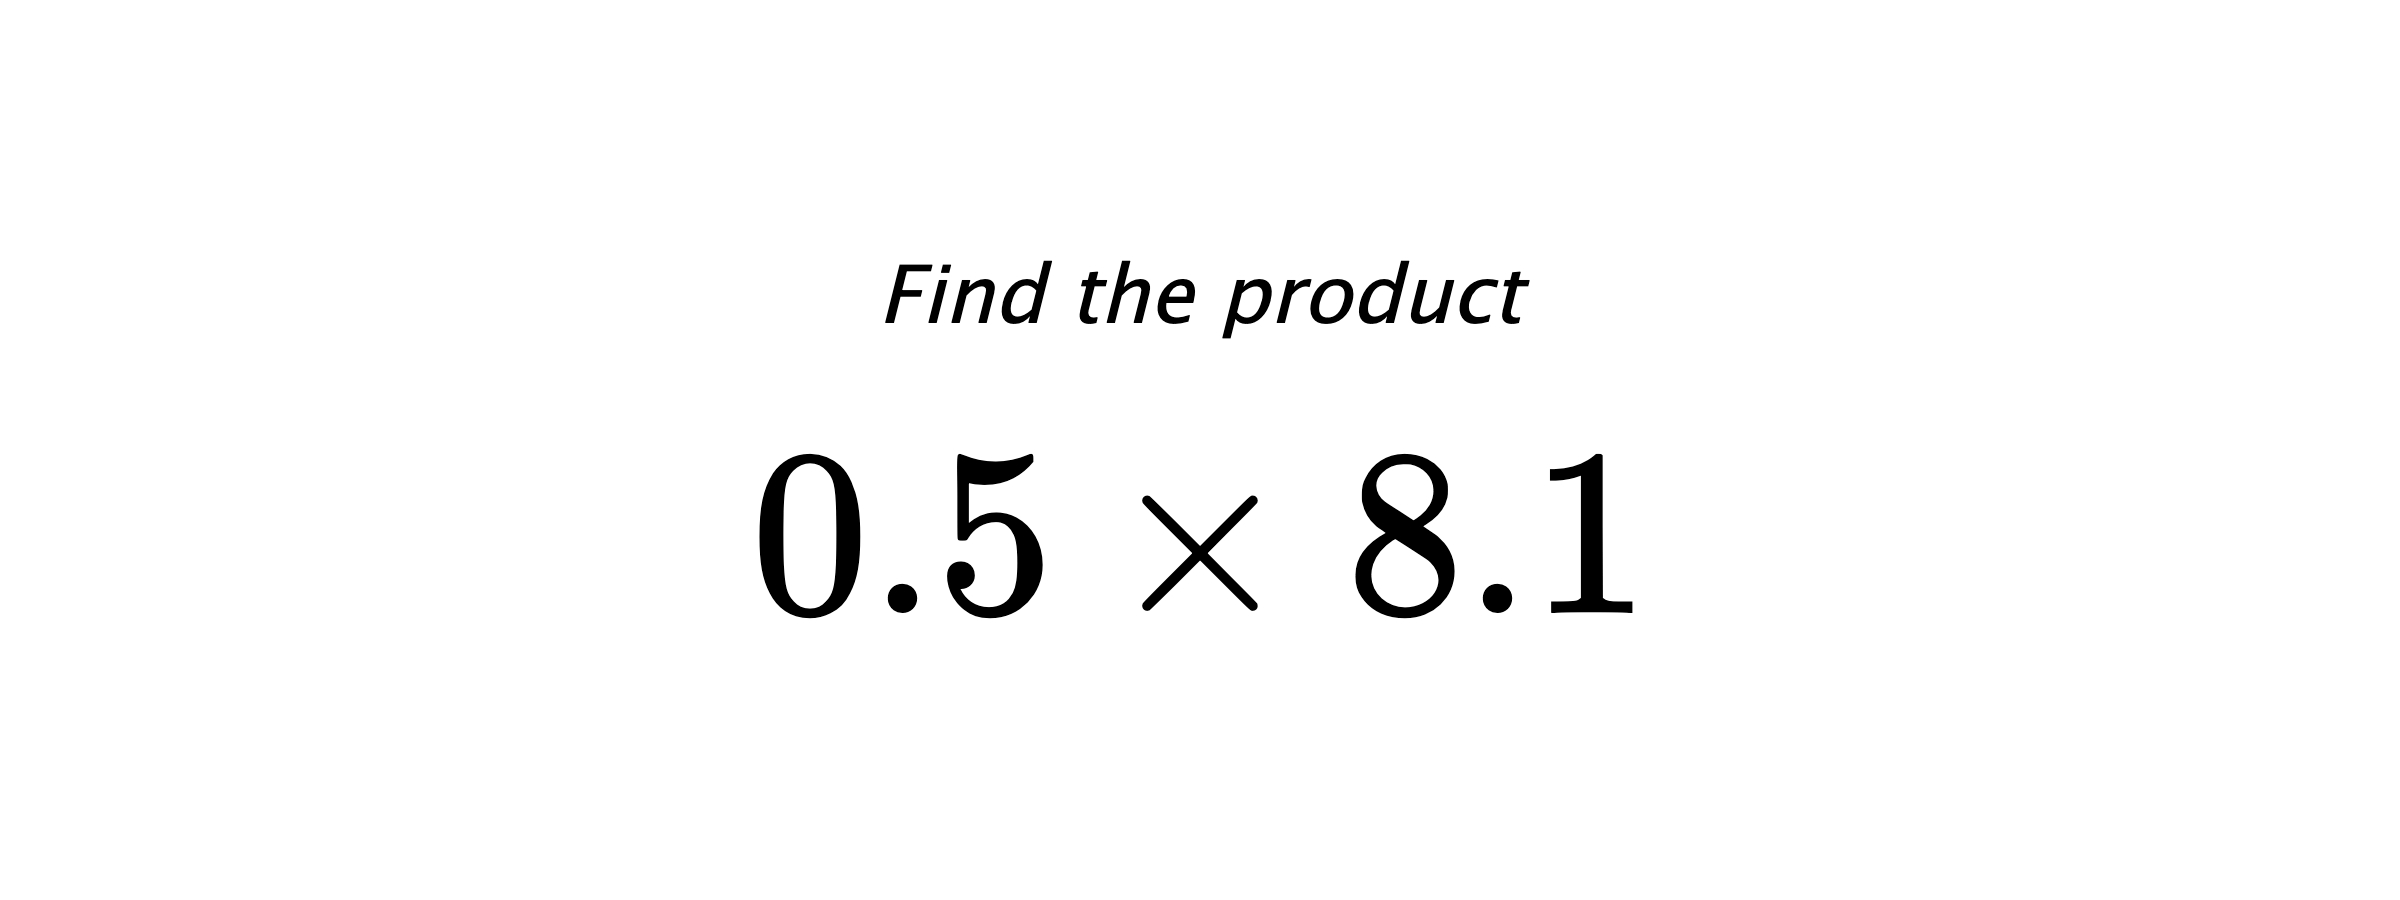 Find the product $ 0.5 \times 8.1 $